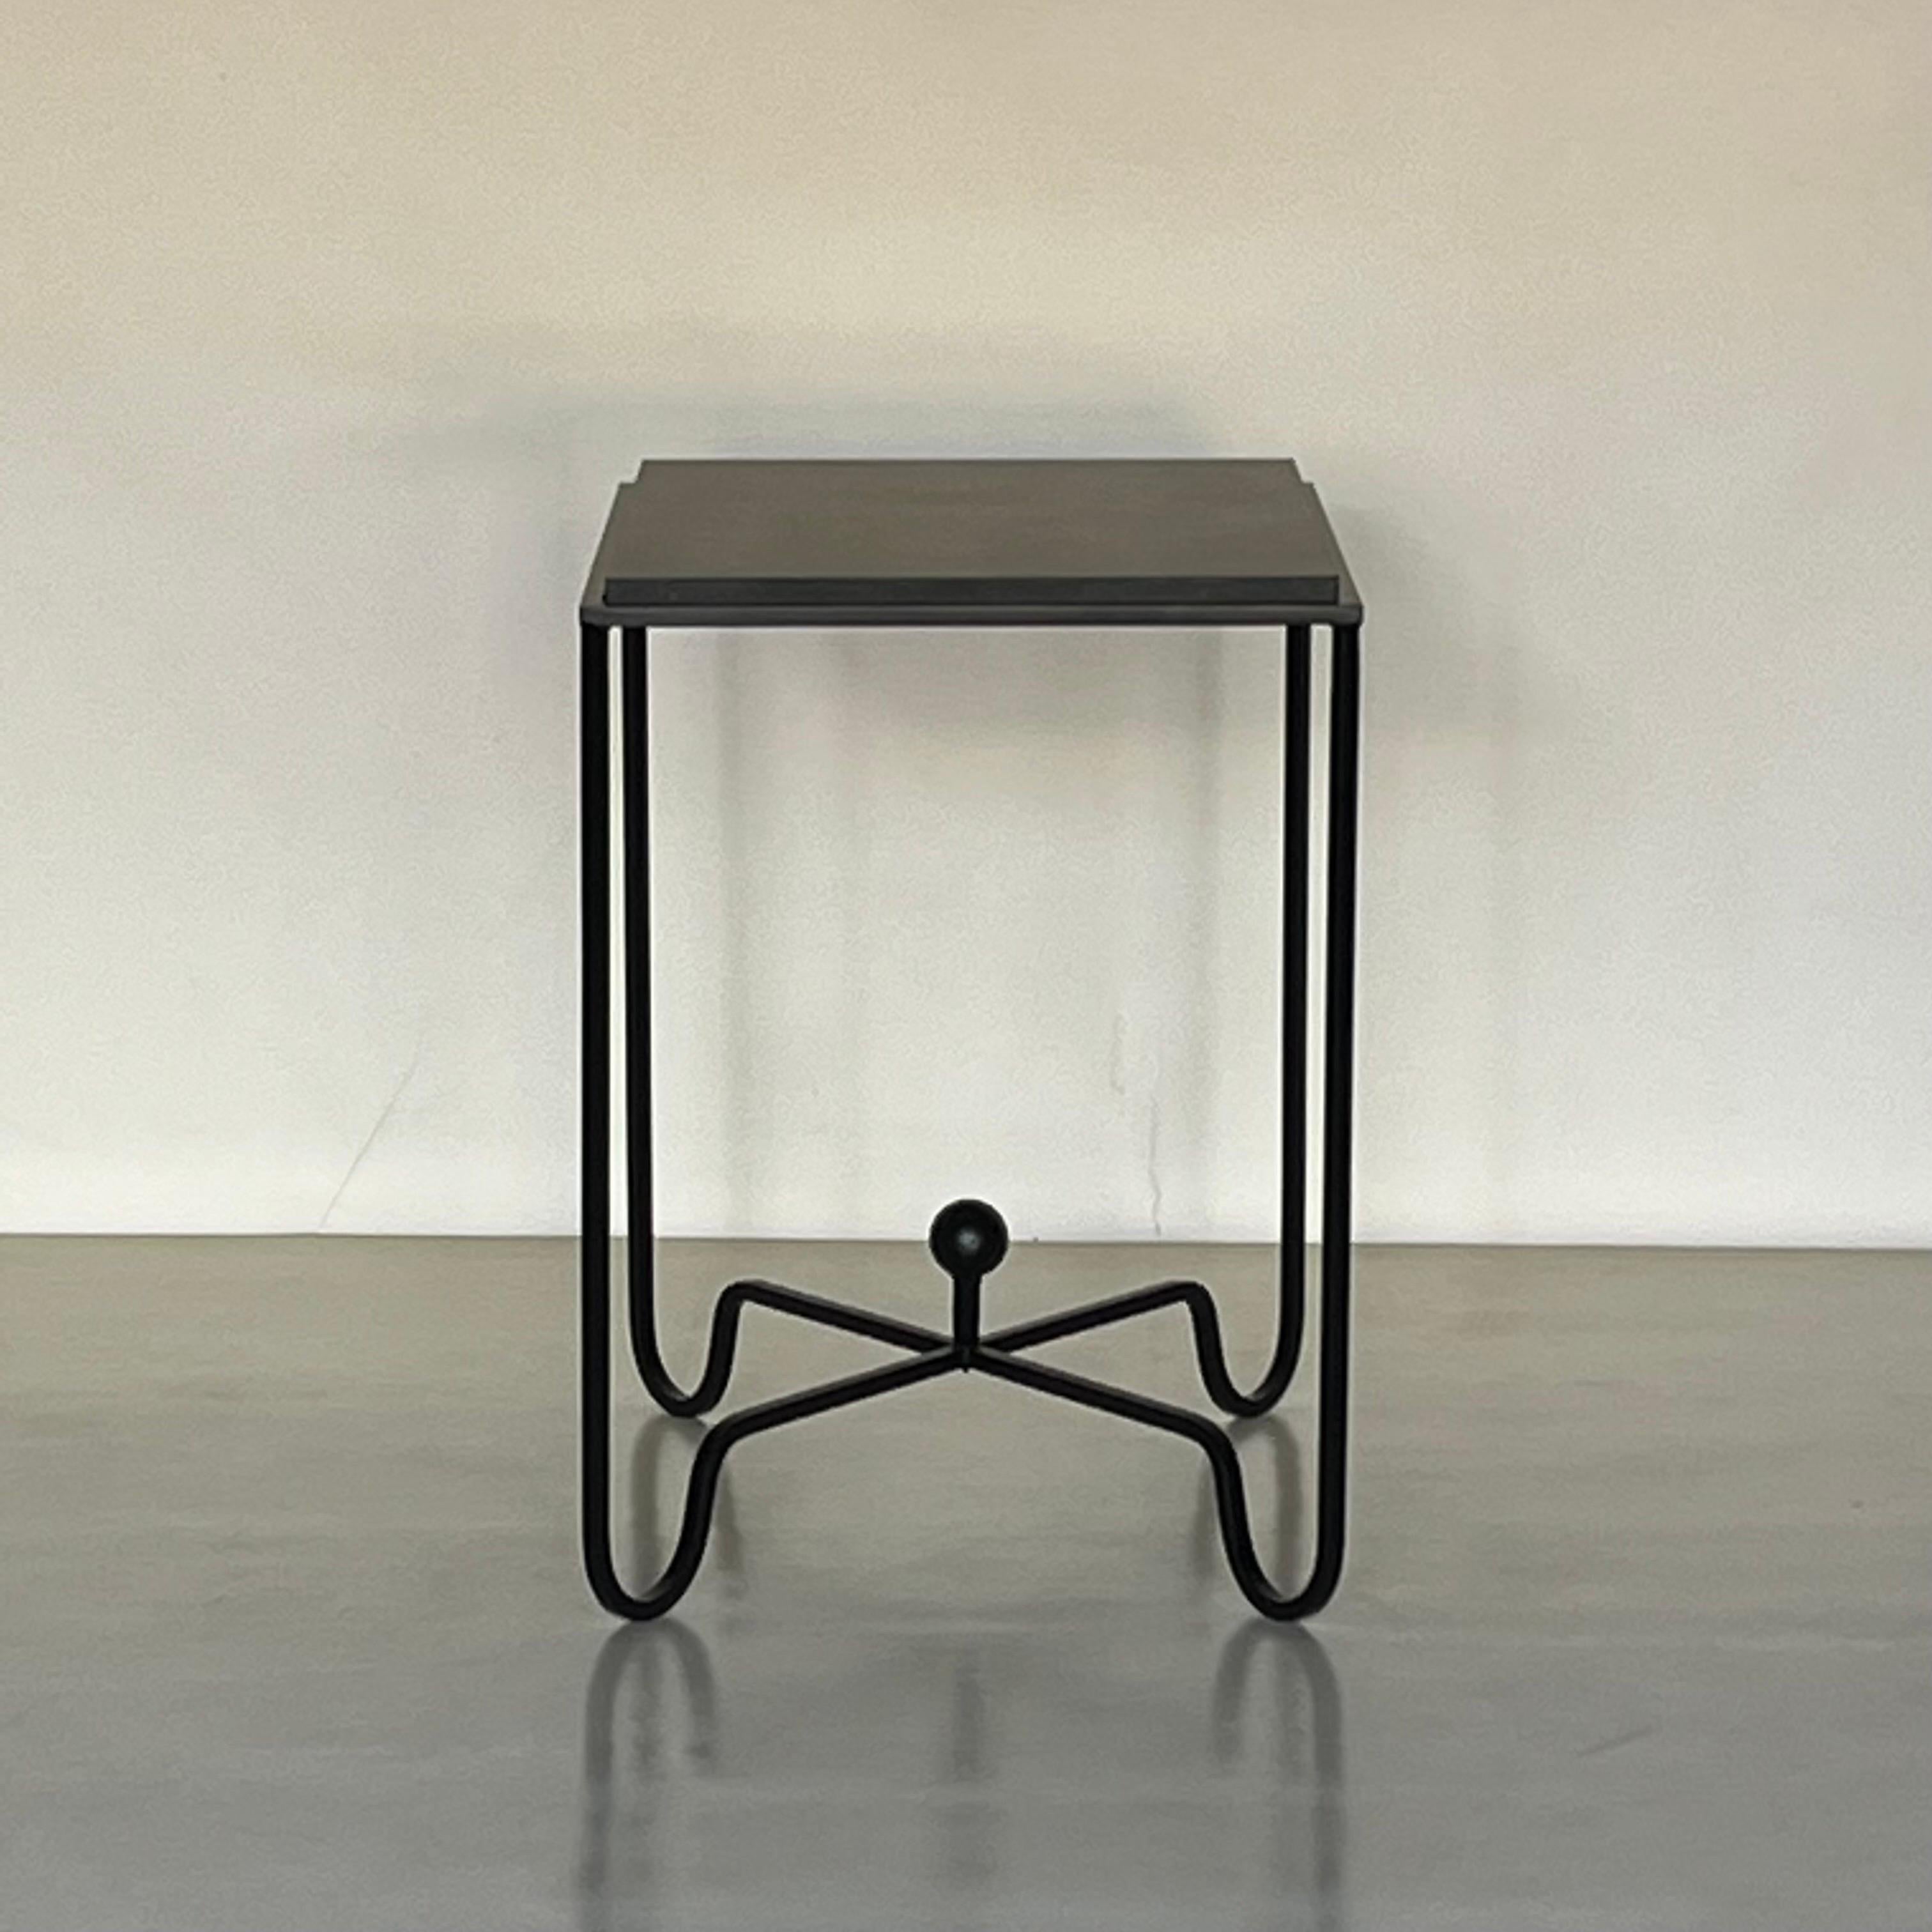 Painted Black Limestone Entretoise side tables or small nightstands by Design Frères For Sale